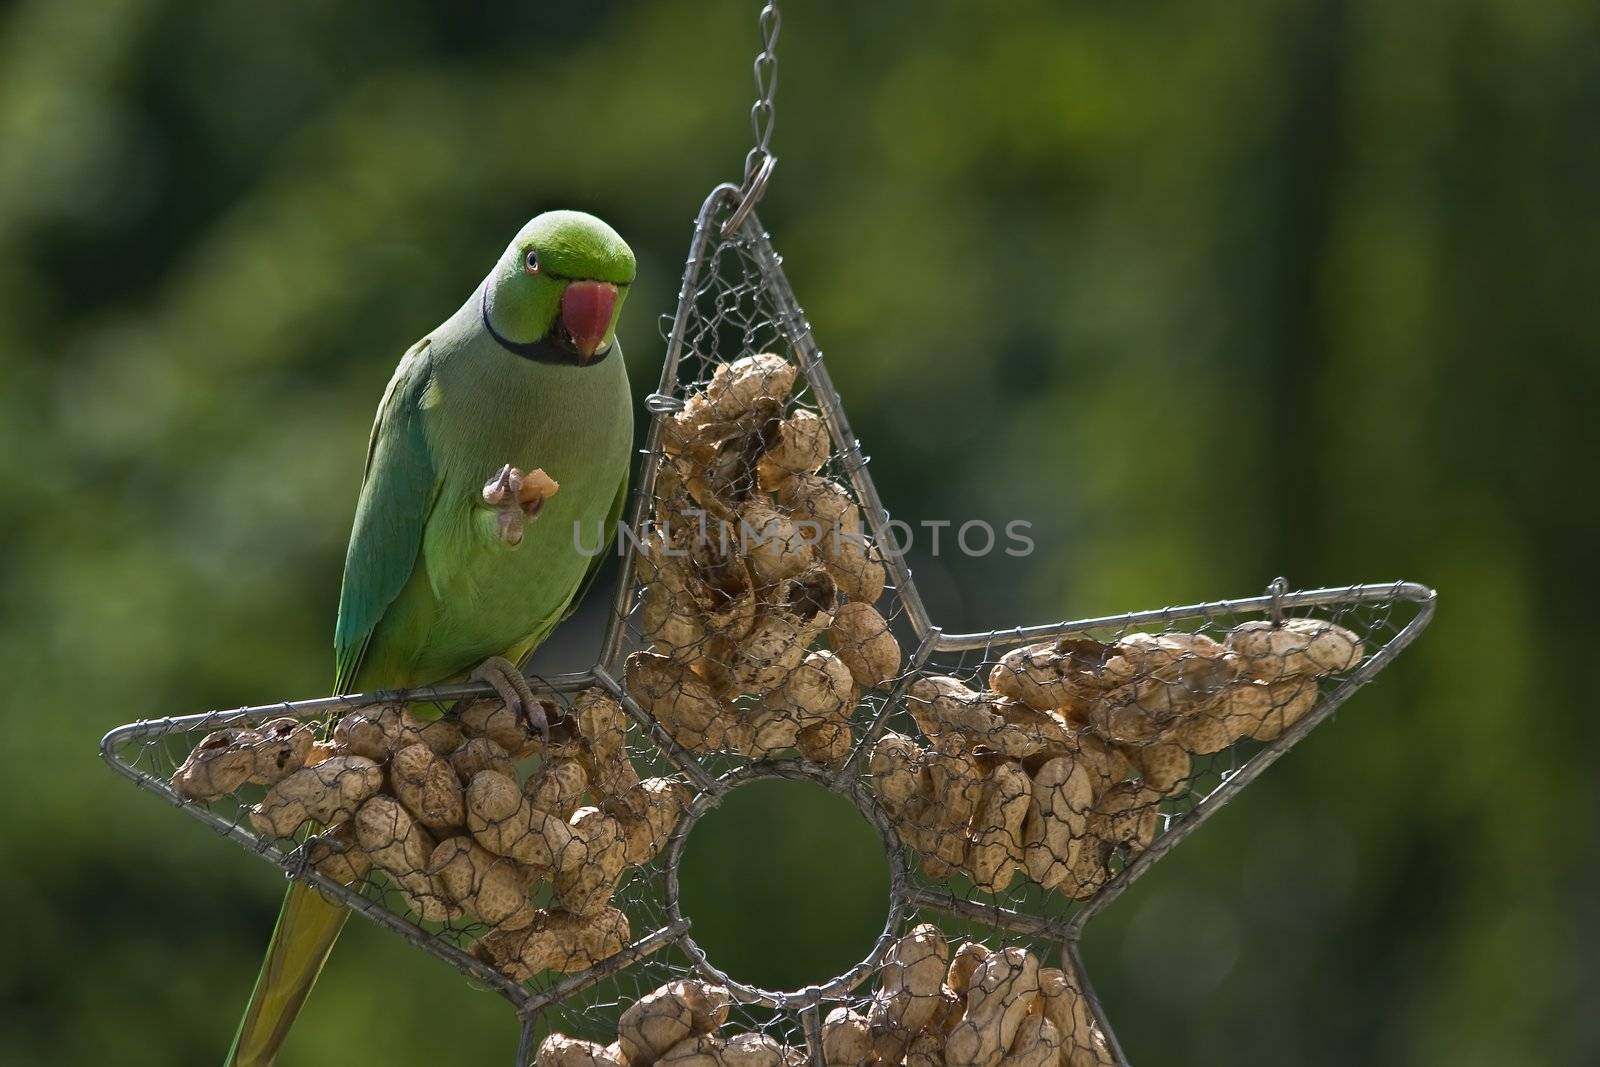 Ringnecked parakeet eating peanut by Colette